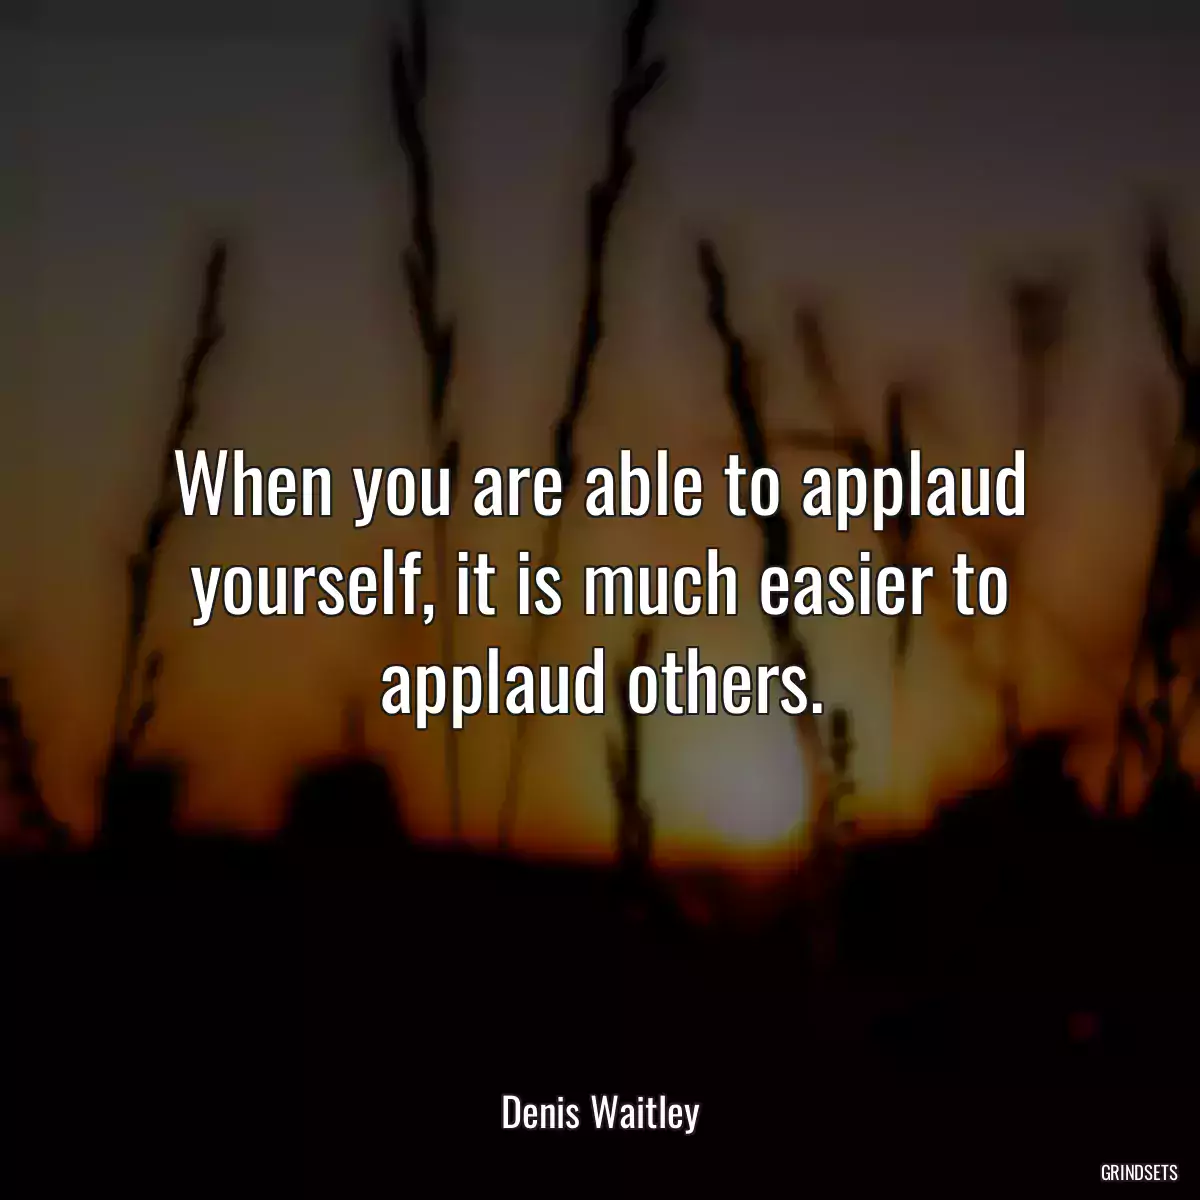 When you are able to applaud yourself, it is much easier to applaud others.